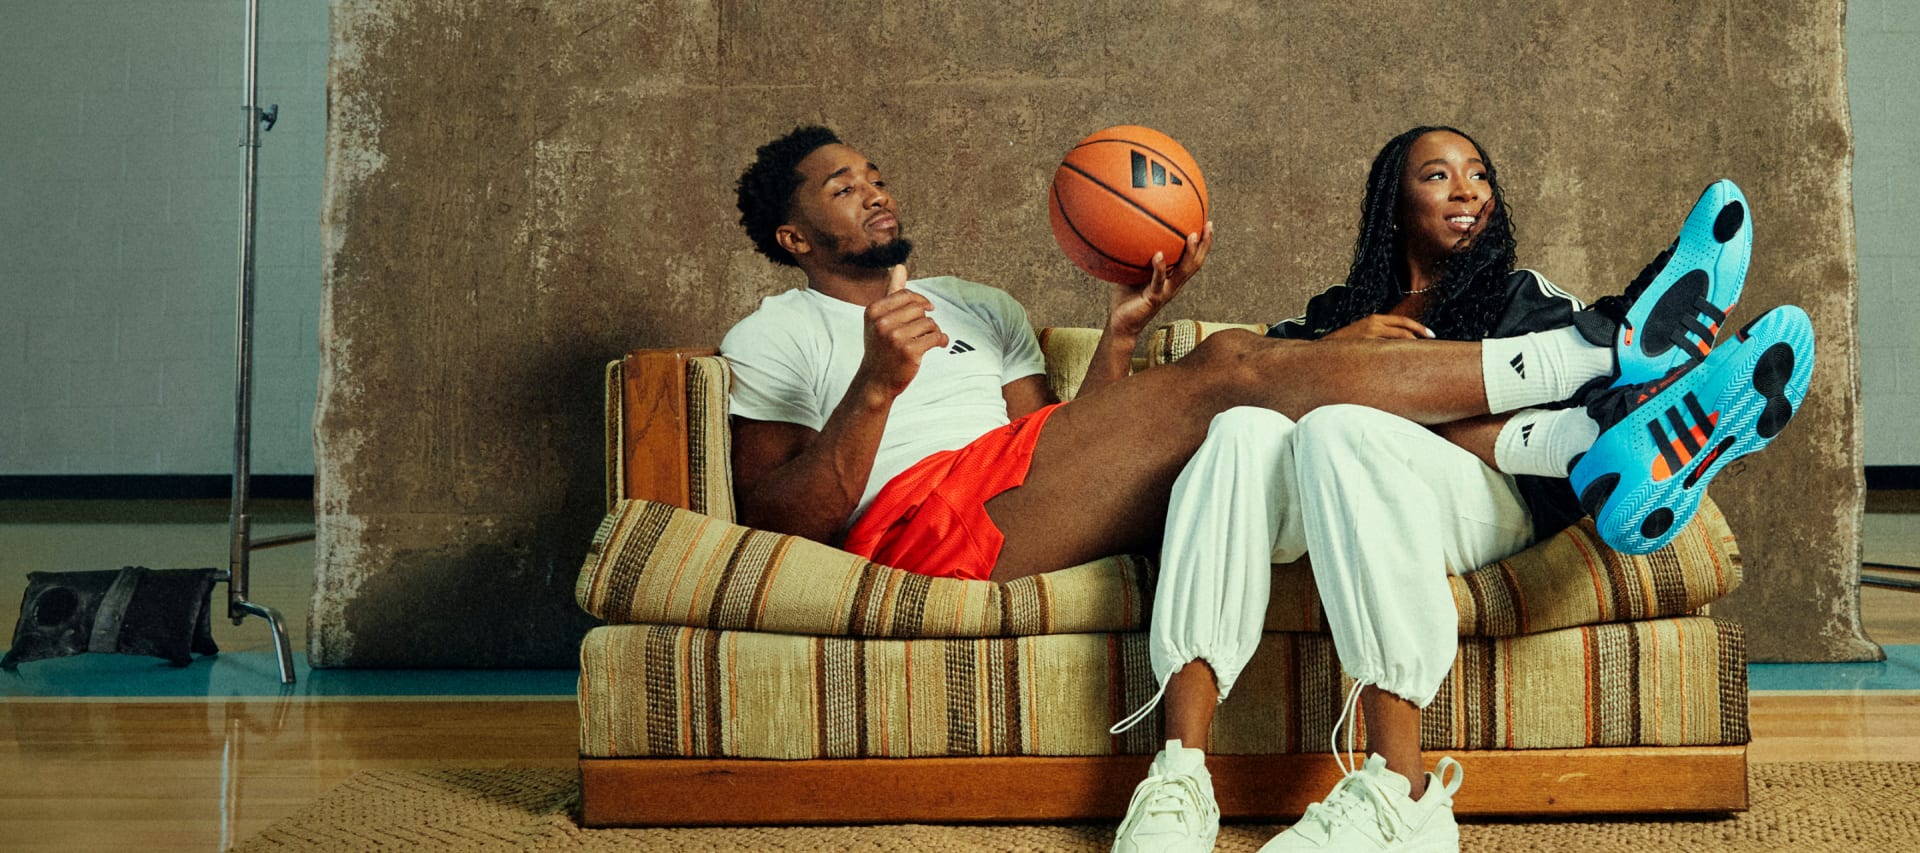 Donovan Mitchell relaxes on striped sofa holding basketball, with legs over woman's lap